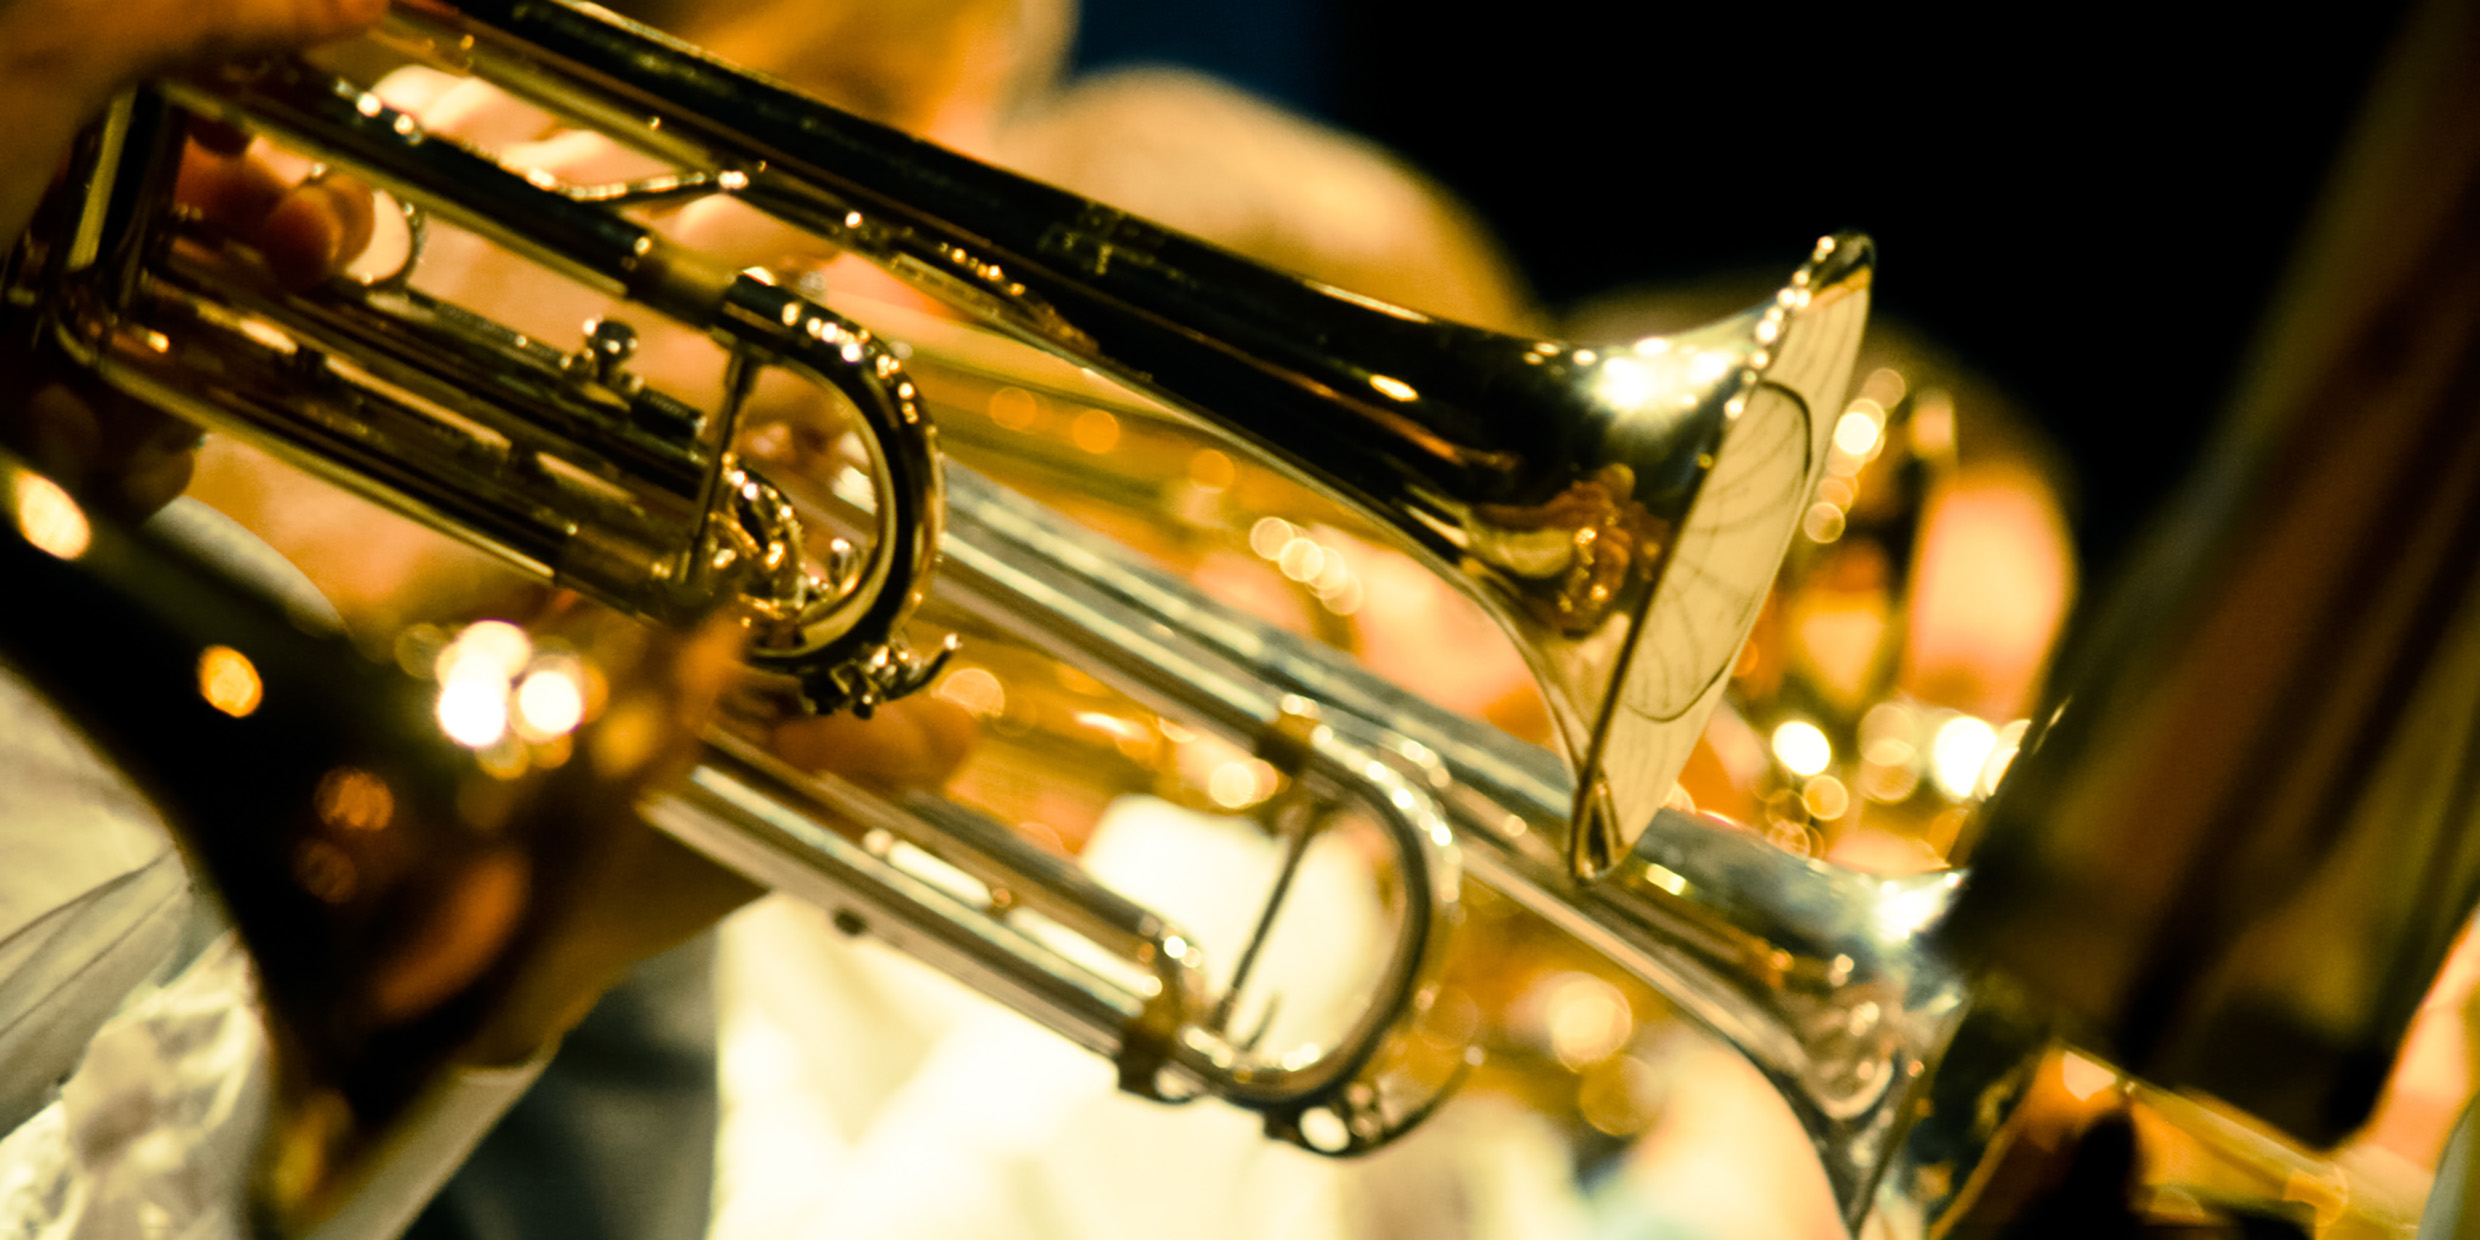 Image of shiny brass instruments playing in an orchestra